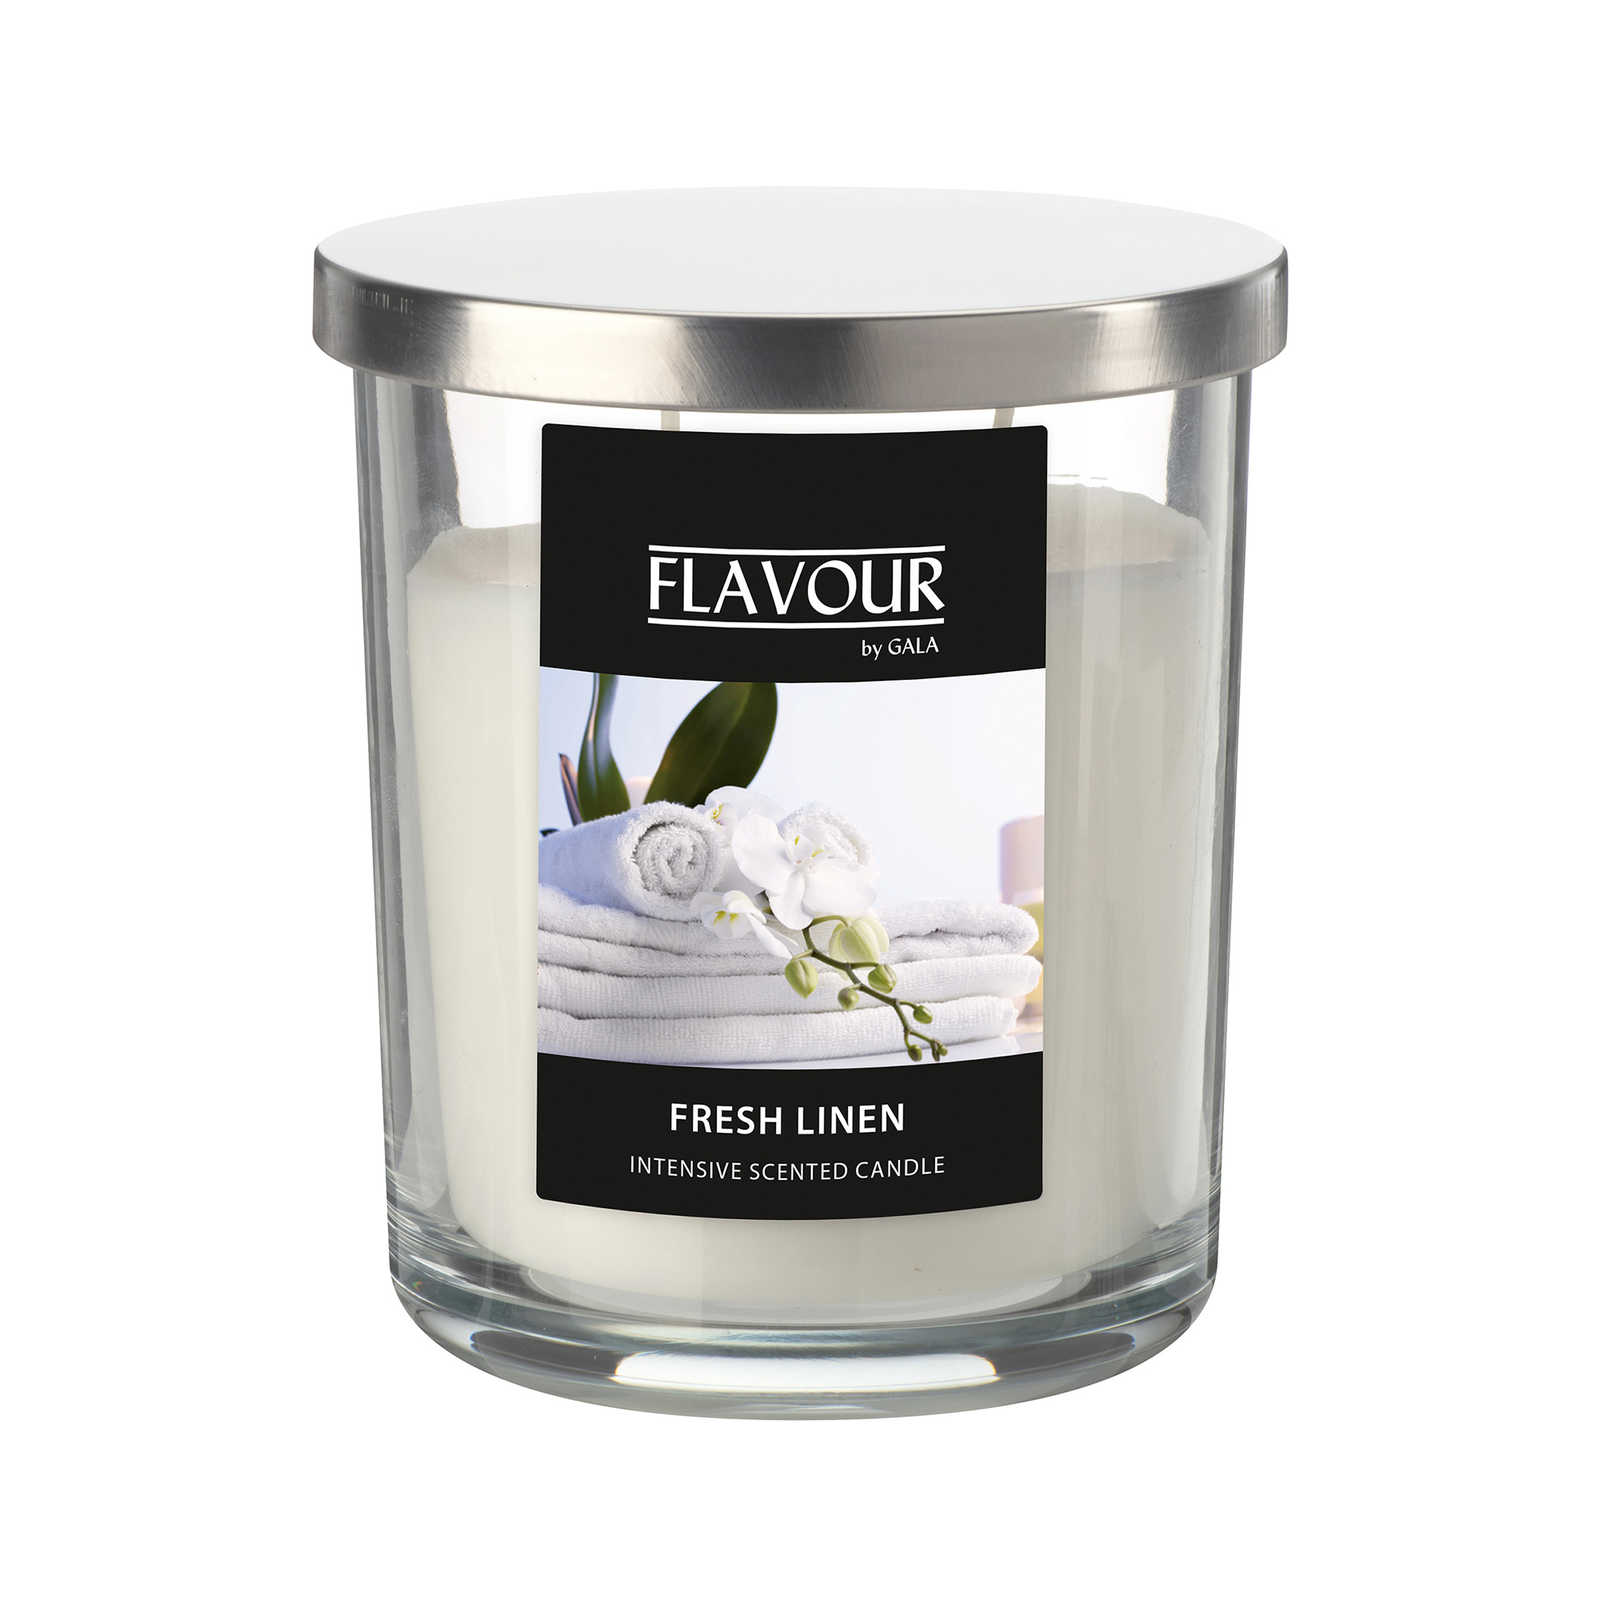         Fresh Linen scented candle with pleasant scent of freshly washed laundry - 380g
    